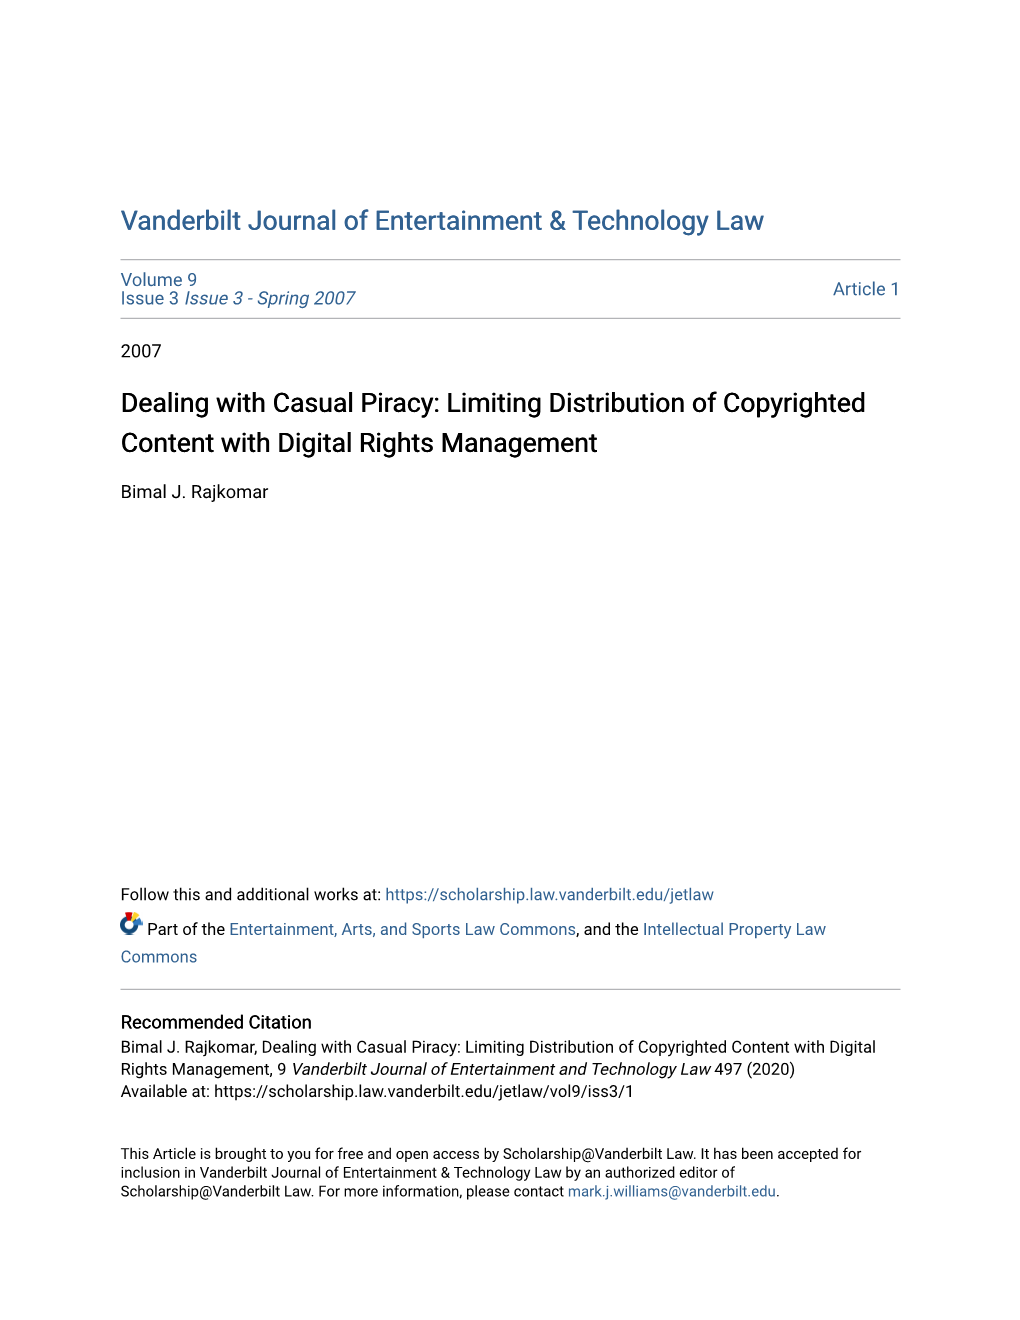 Dealing with Casual Piracy: Limiting Distribution of Copyrighted Content with Digital Rights Management